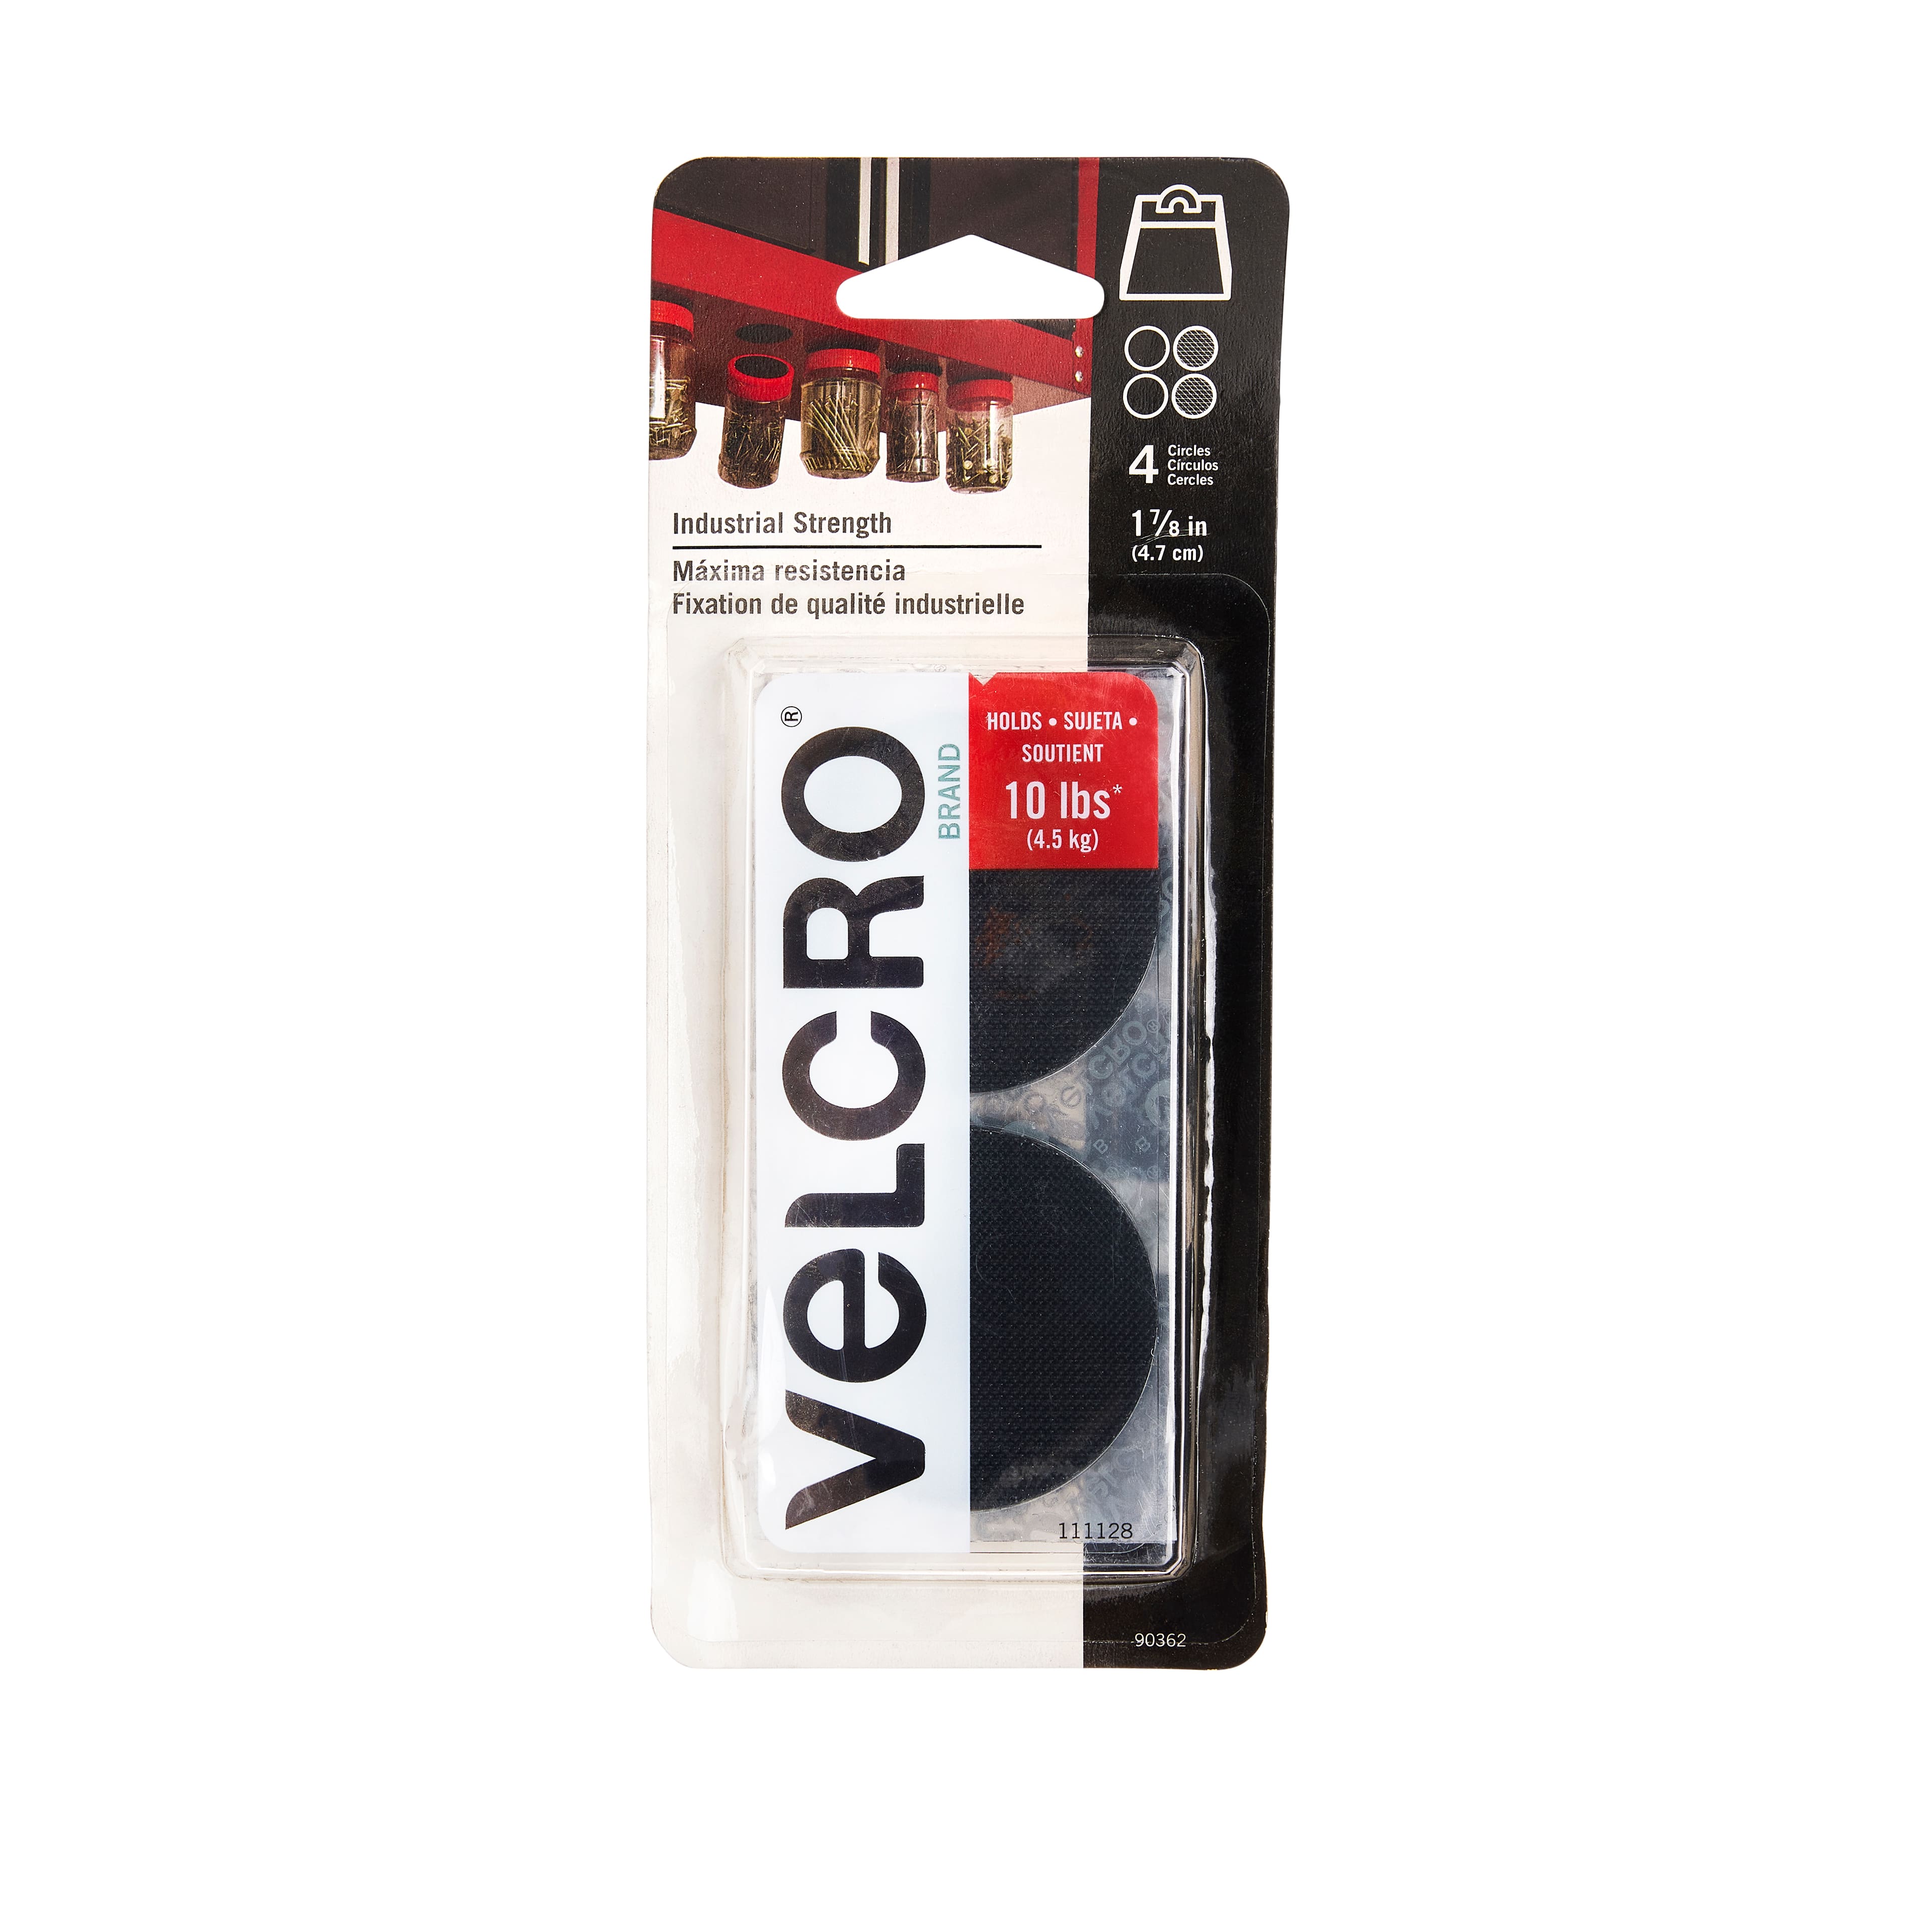 VELCRO Brand Industrial Strength Fasteners, Stick-On Adhesive, Professional Grade Heavy Duty Strength Holds up to 10 lbs on Smooth  Surfaces, Indoor Outdoor Use